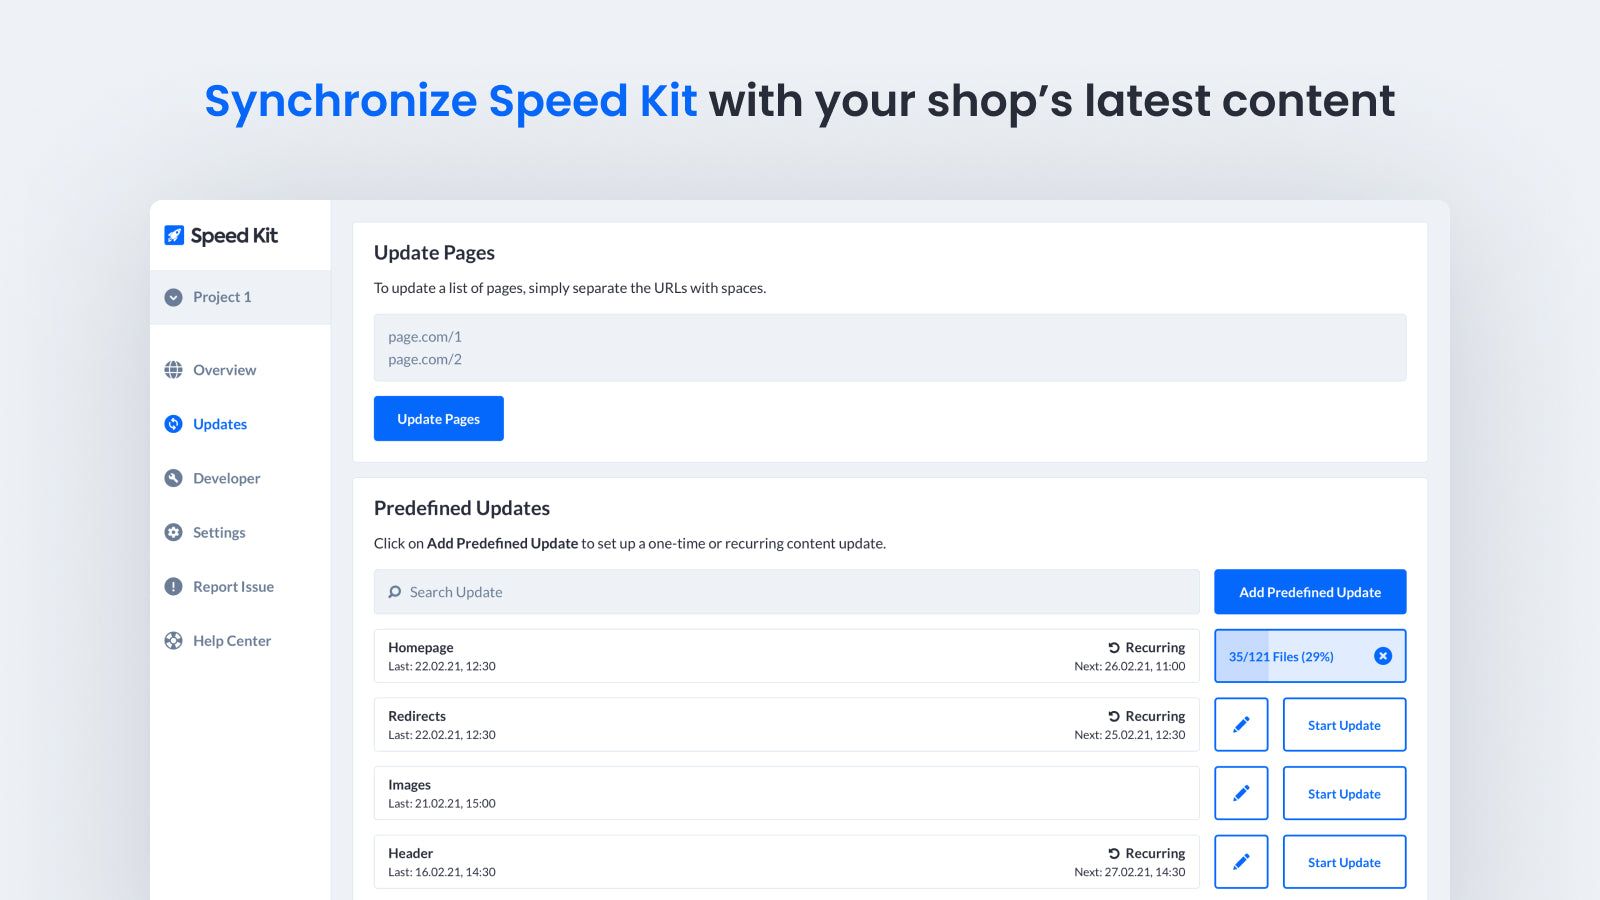 Synchronize Speed Kit with your shop’s latest content